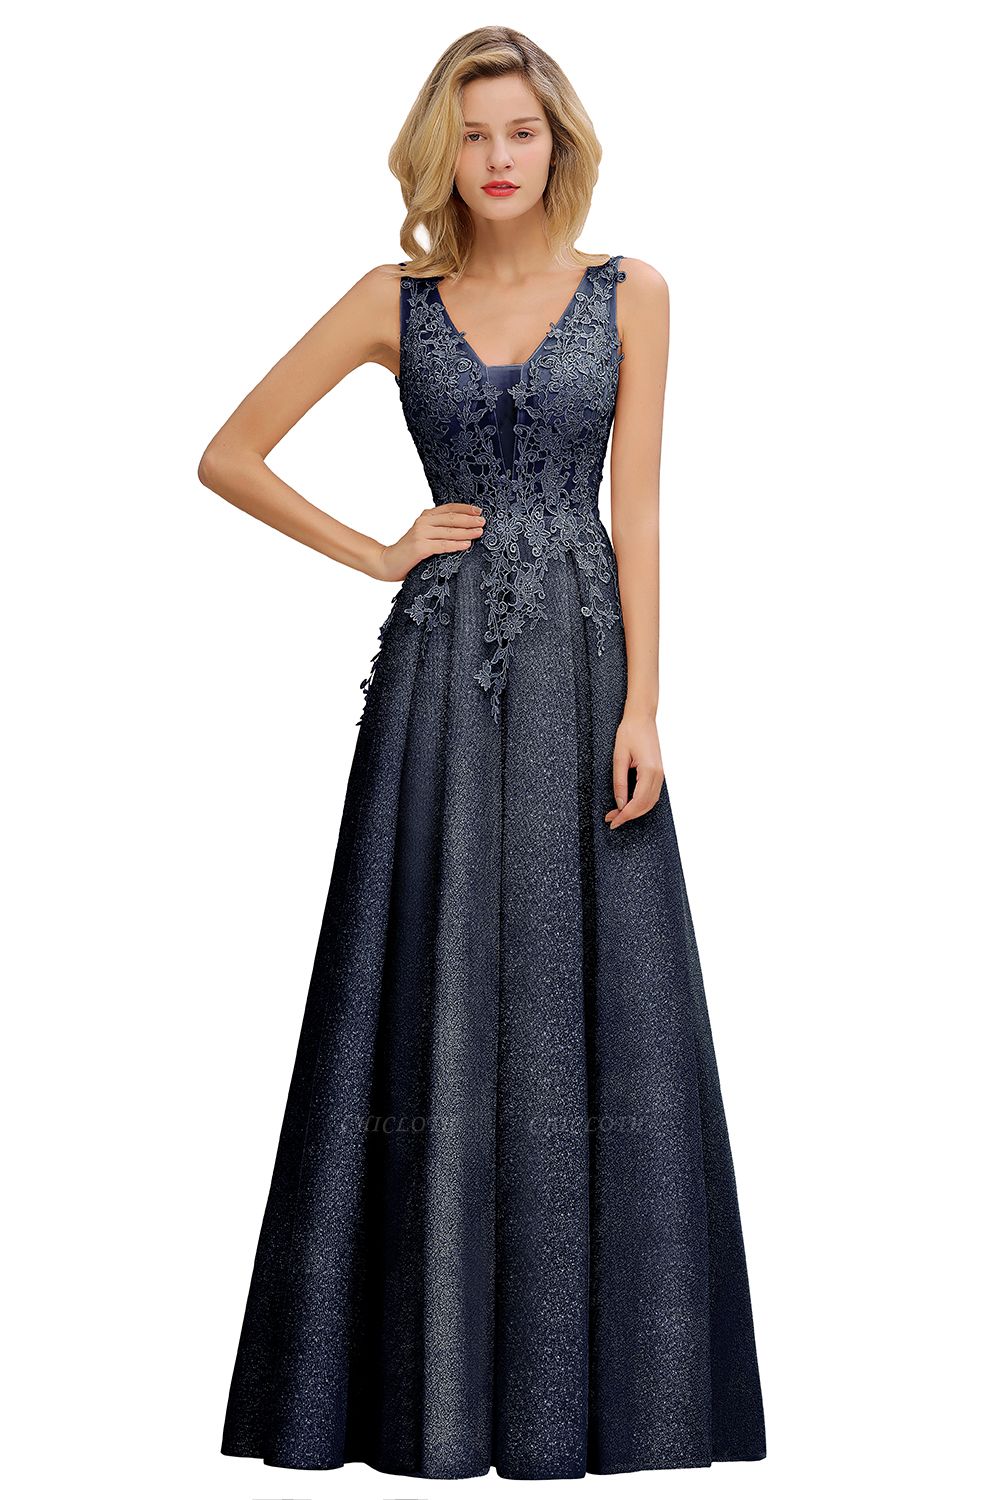 Chicloth Attractive V-neck Lace A-line Evening Dress